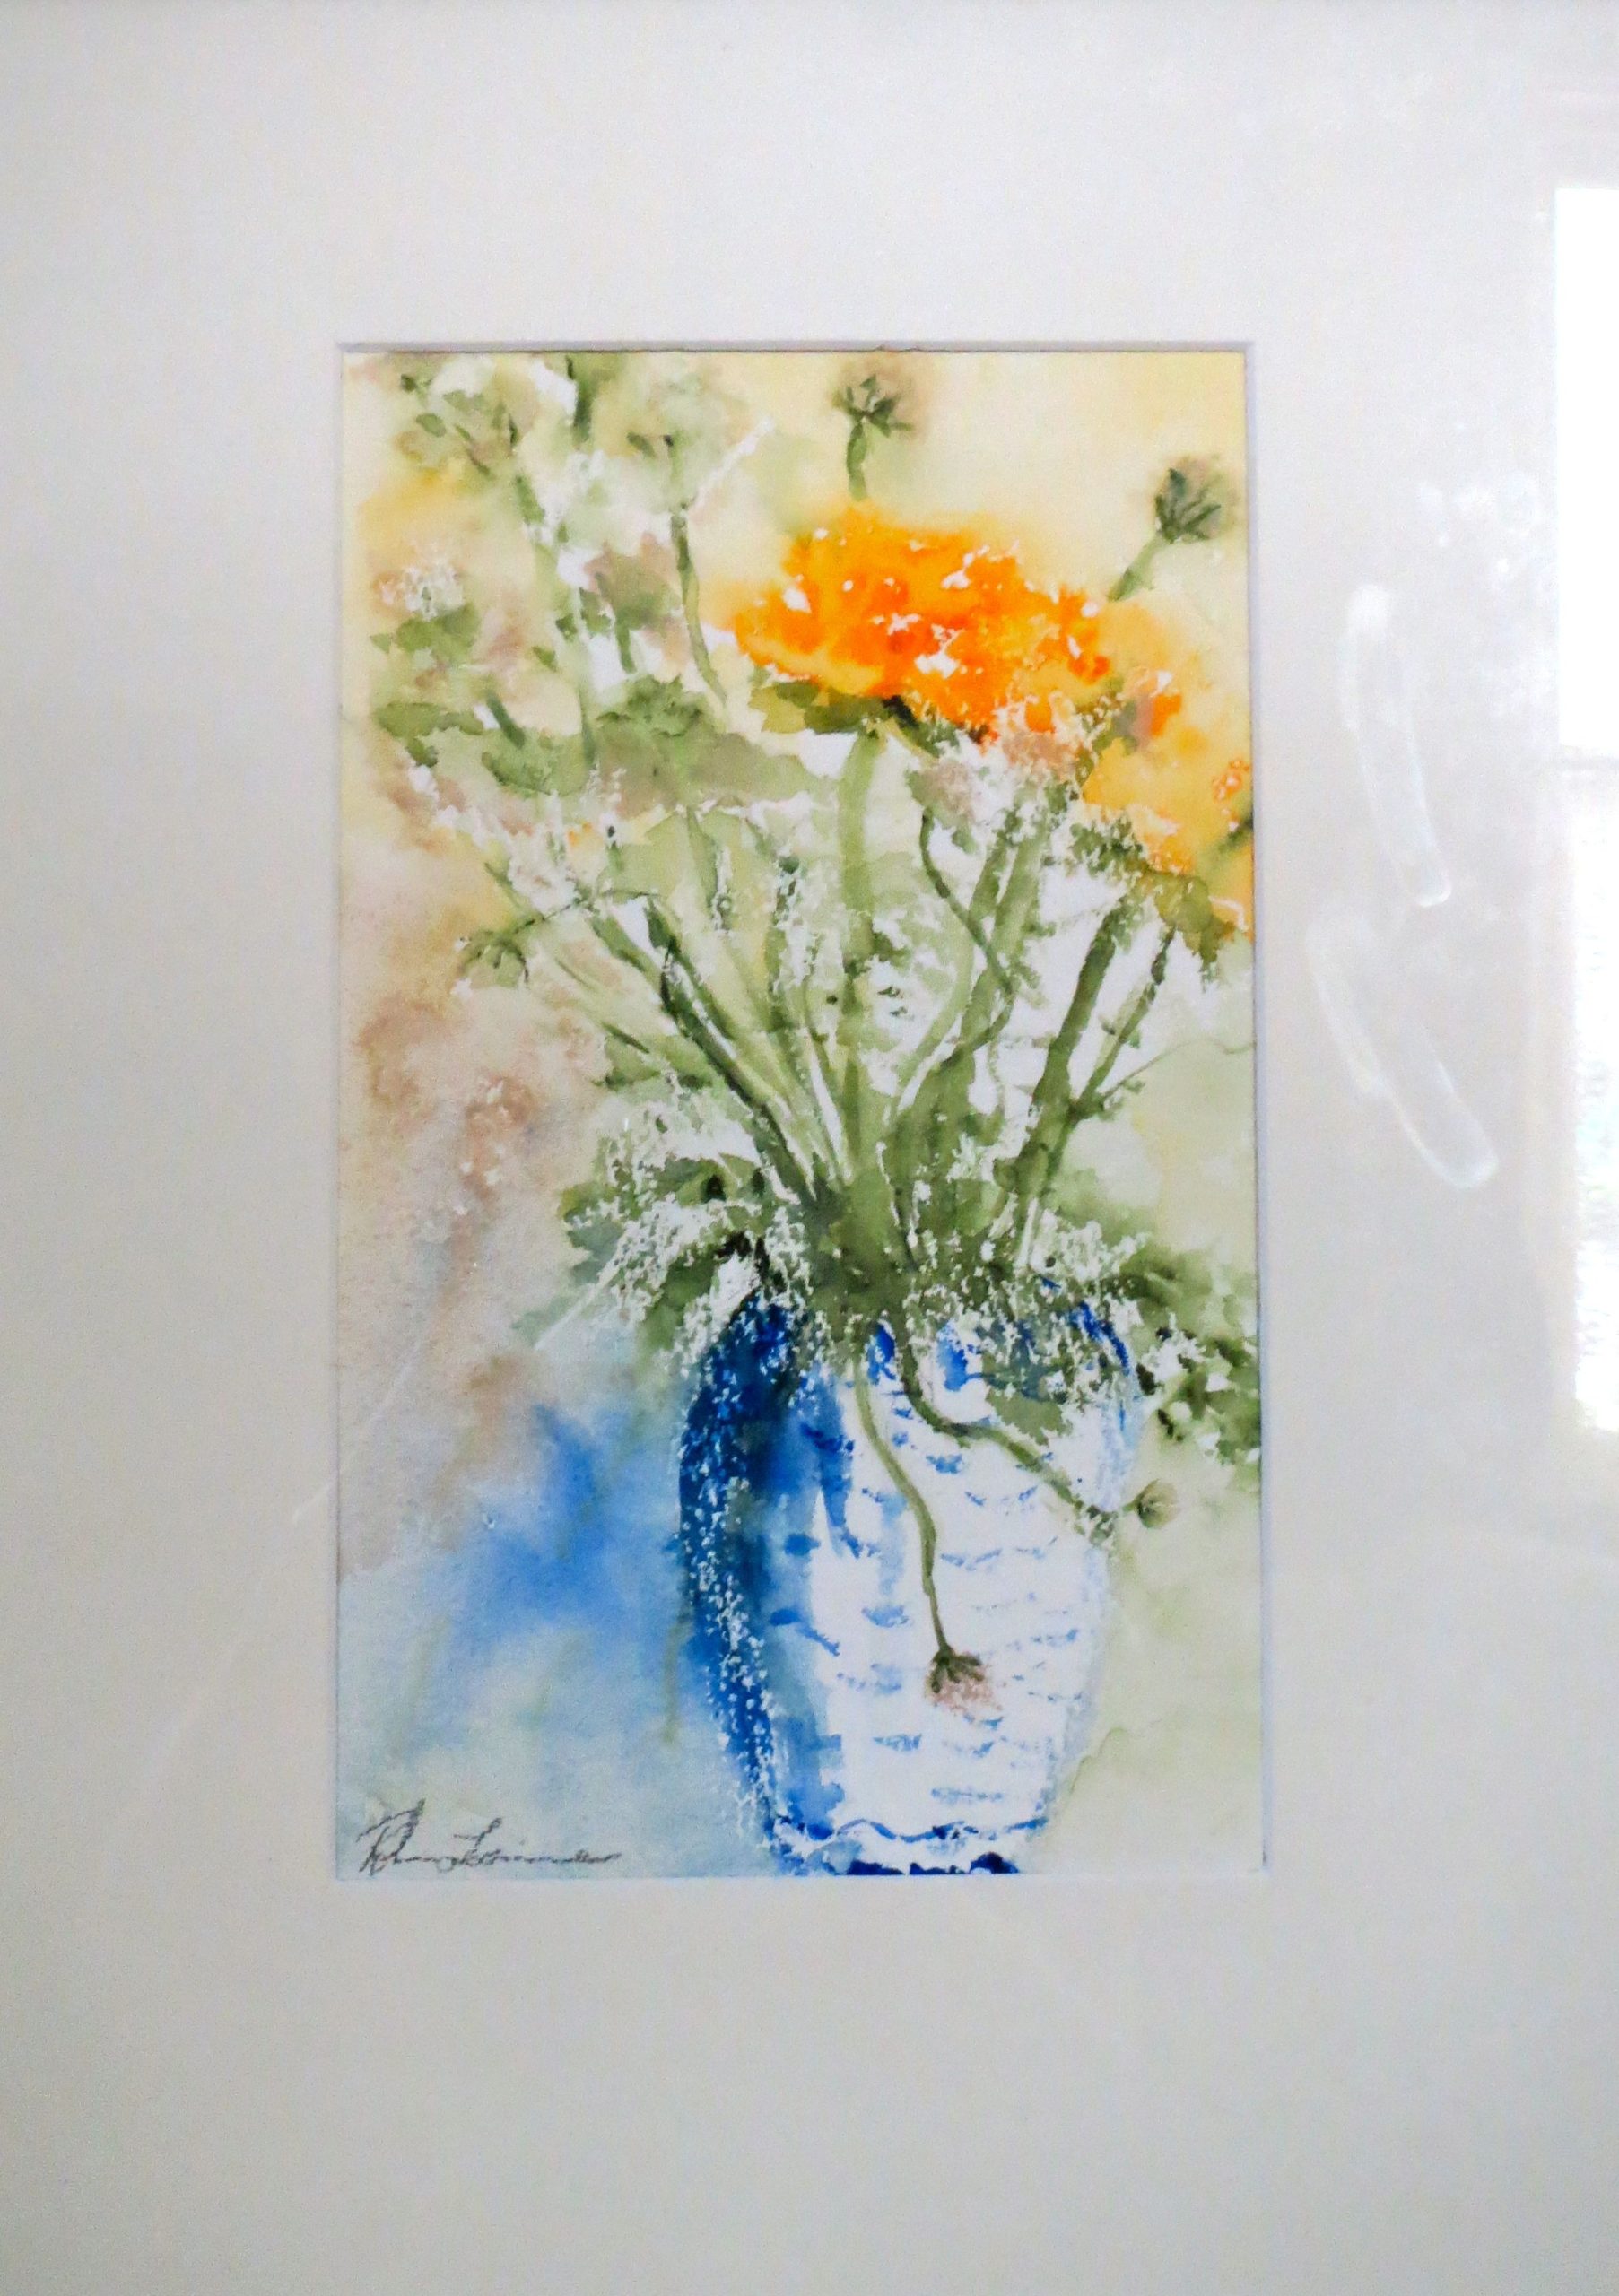 Blue and White Vase with Yellow Flowers, watercolor on paper by Robin Levine